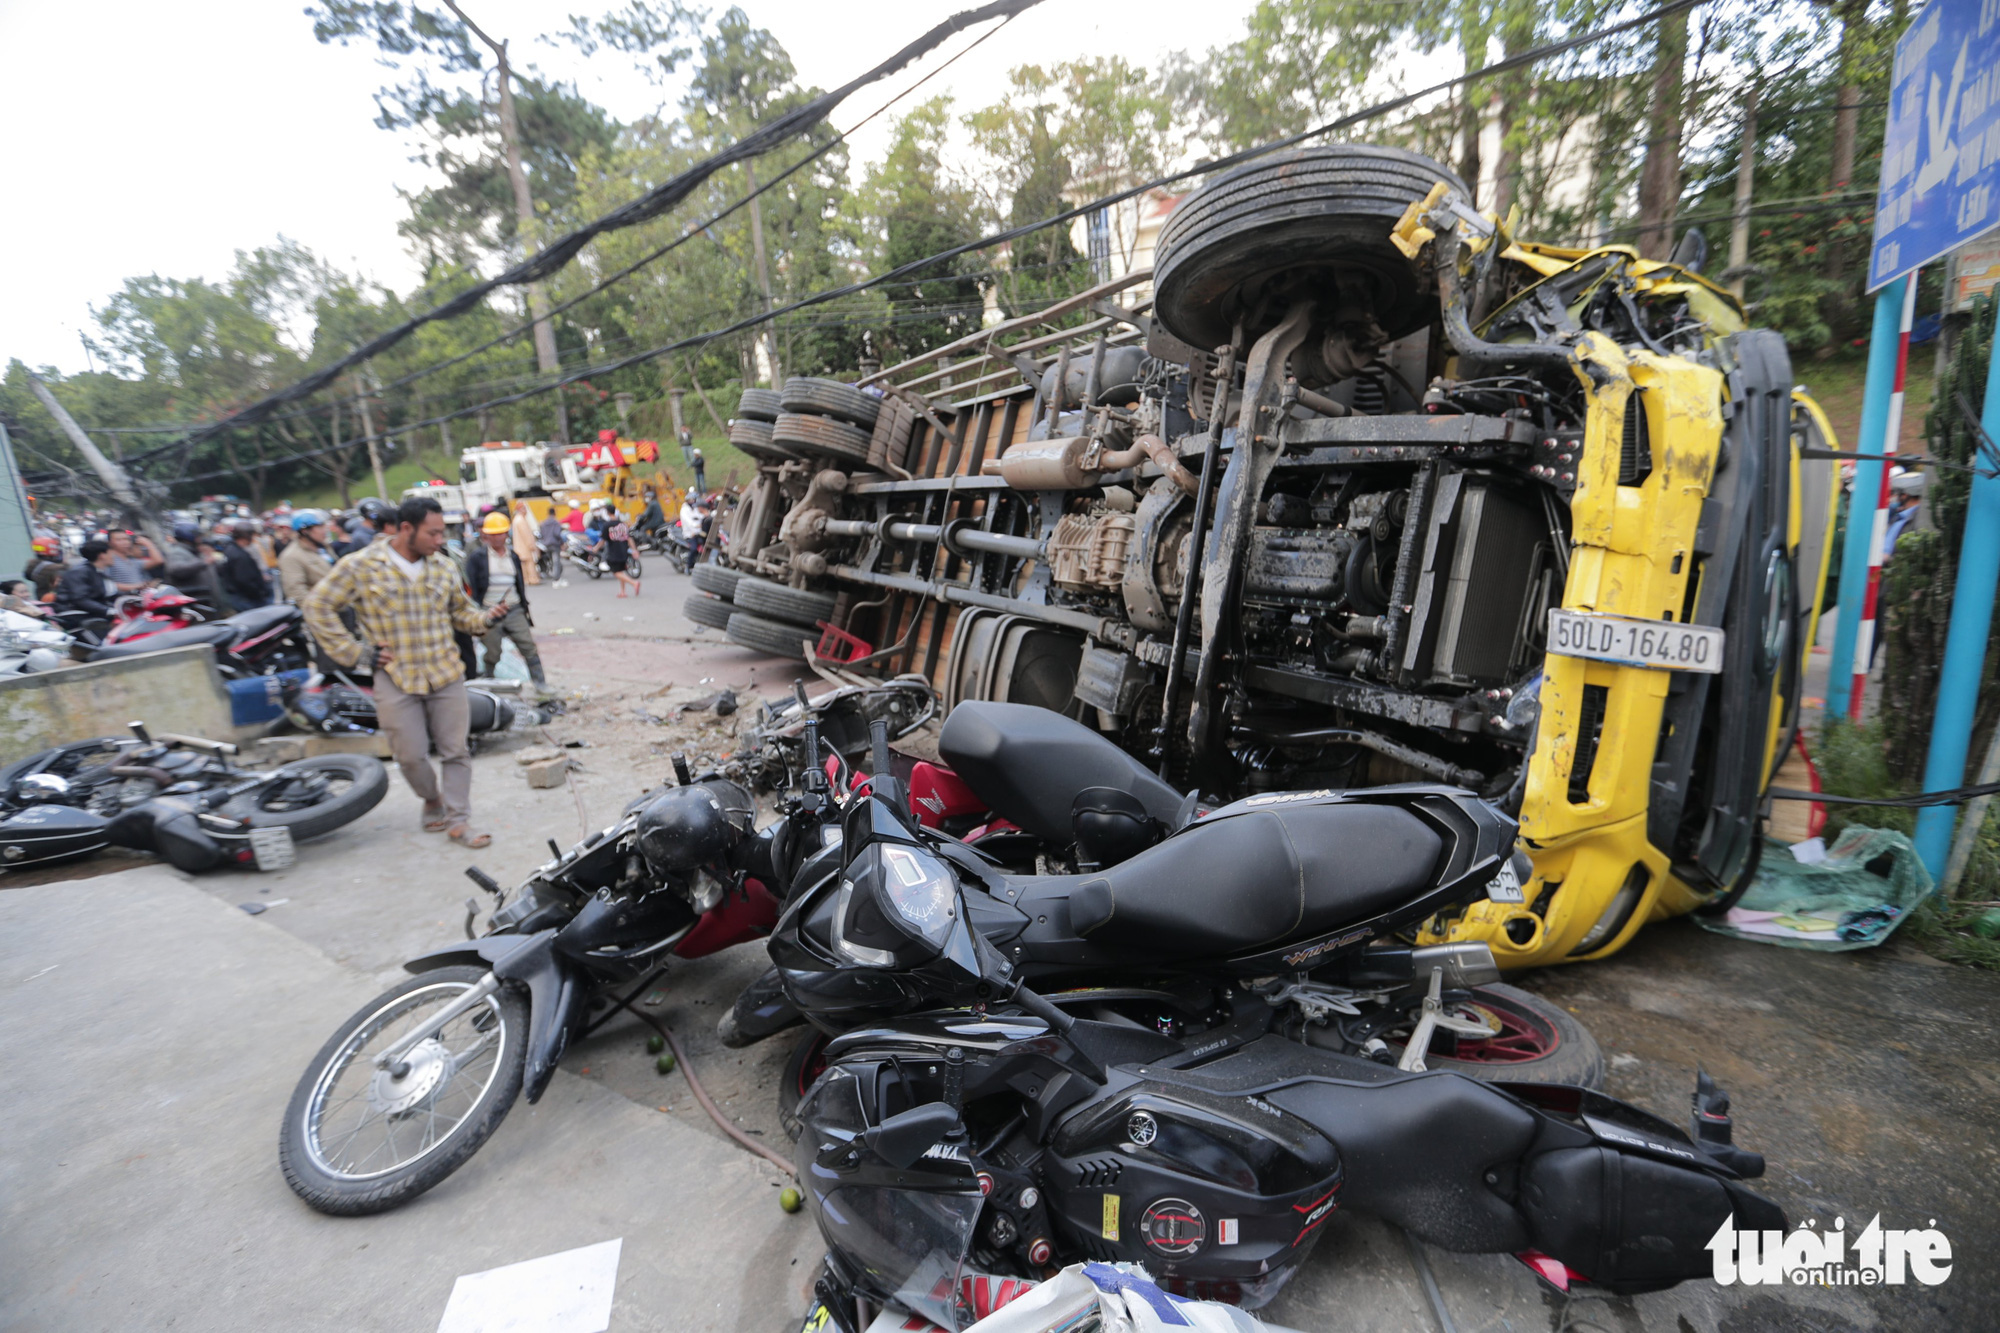 A truck is knocked on its side after sliding down a slope and crashing into multiple motorbikes in Da Lat City, Lam Dong Province, Vietnam, October 24, 2020. Photo: M.Vinh / Tuoi Tre